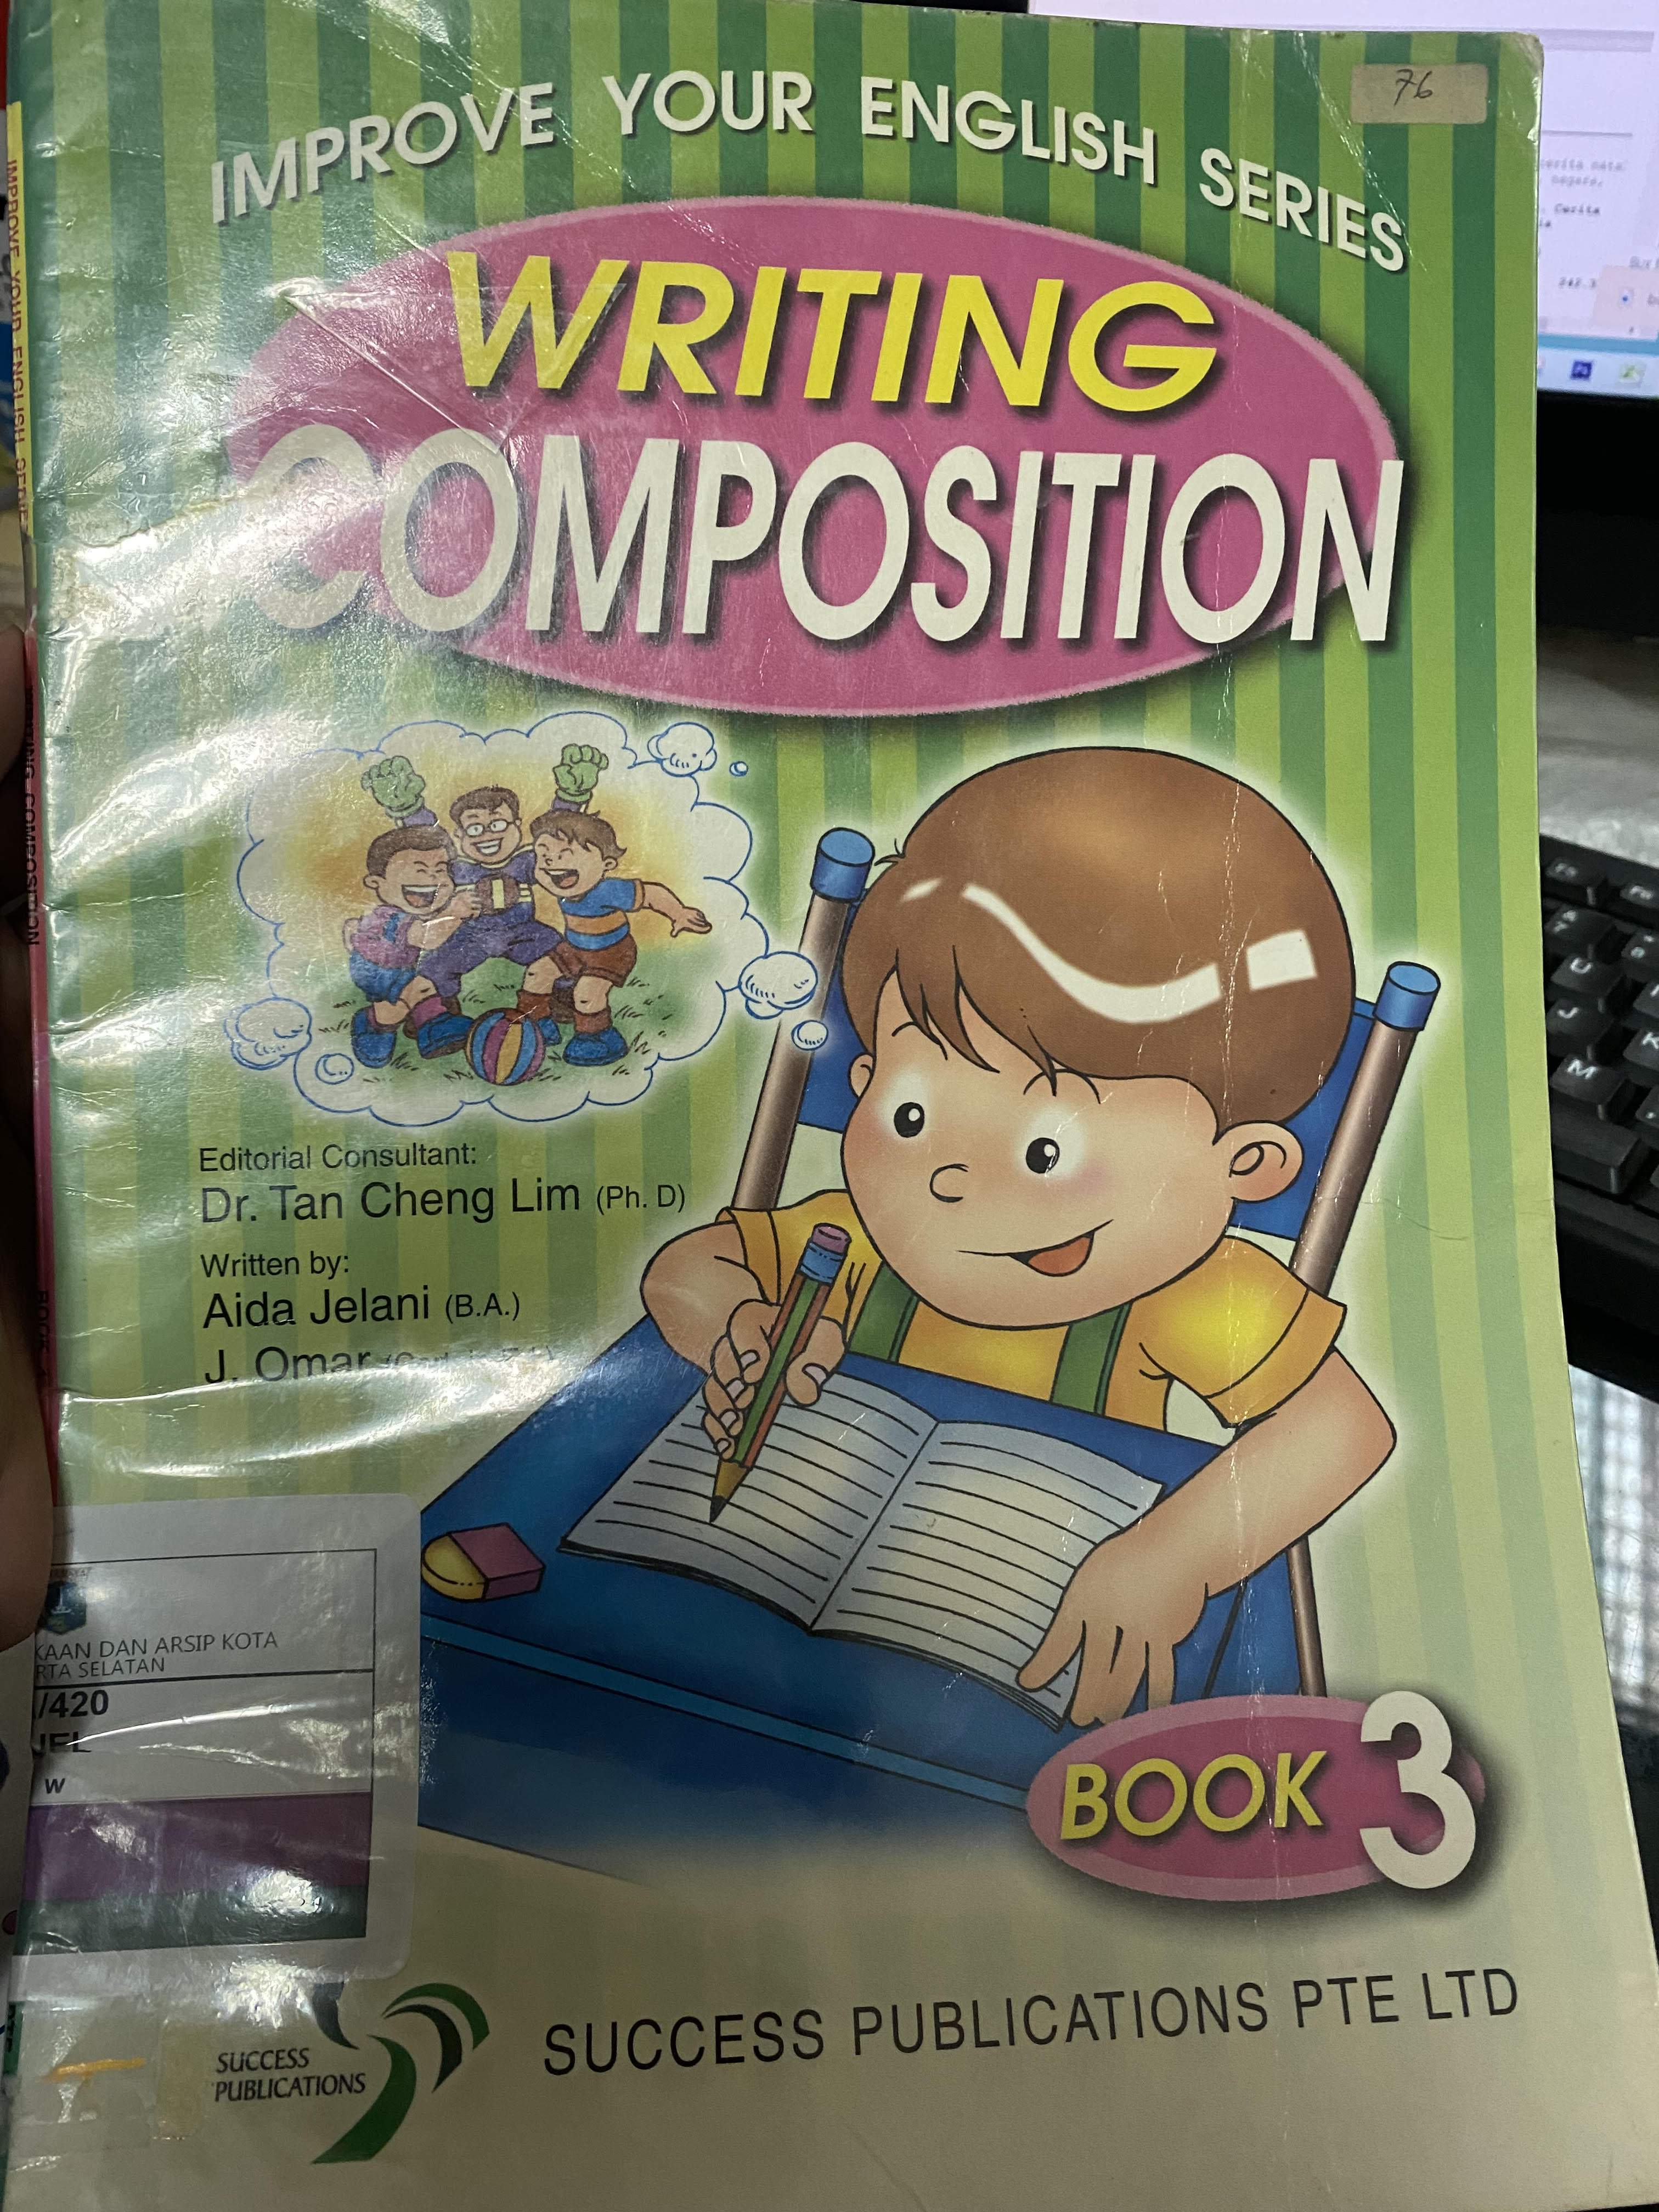 Writing composition book 3